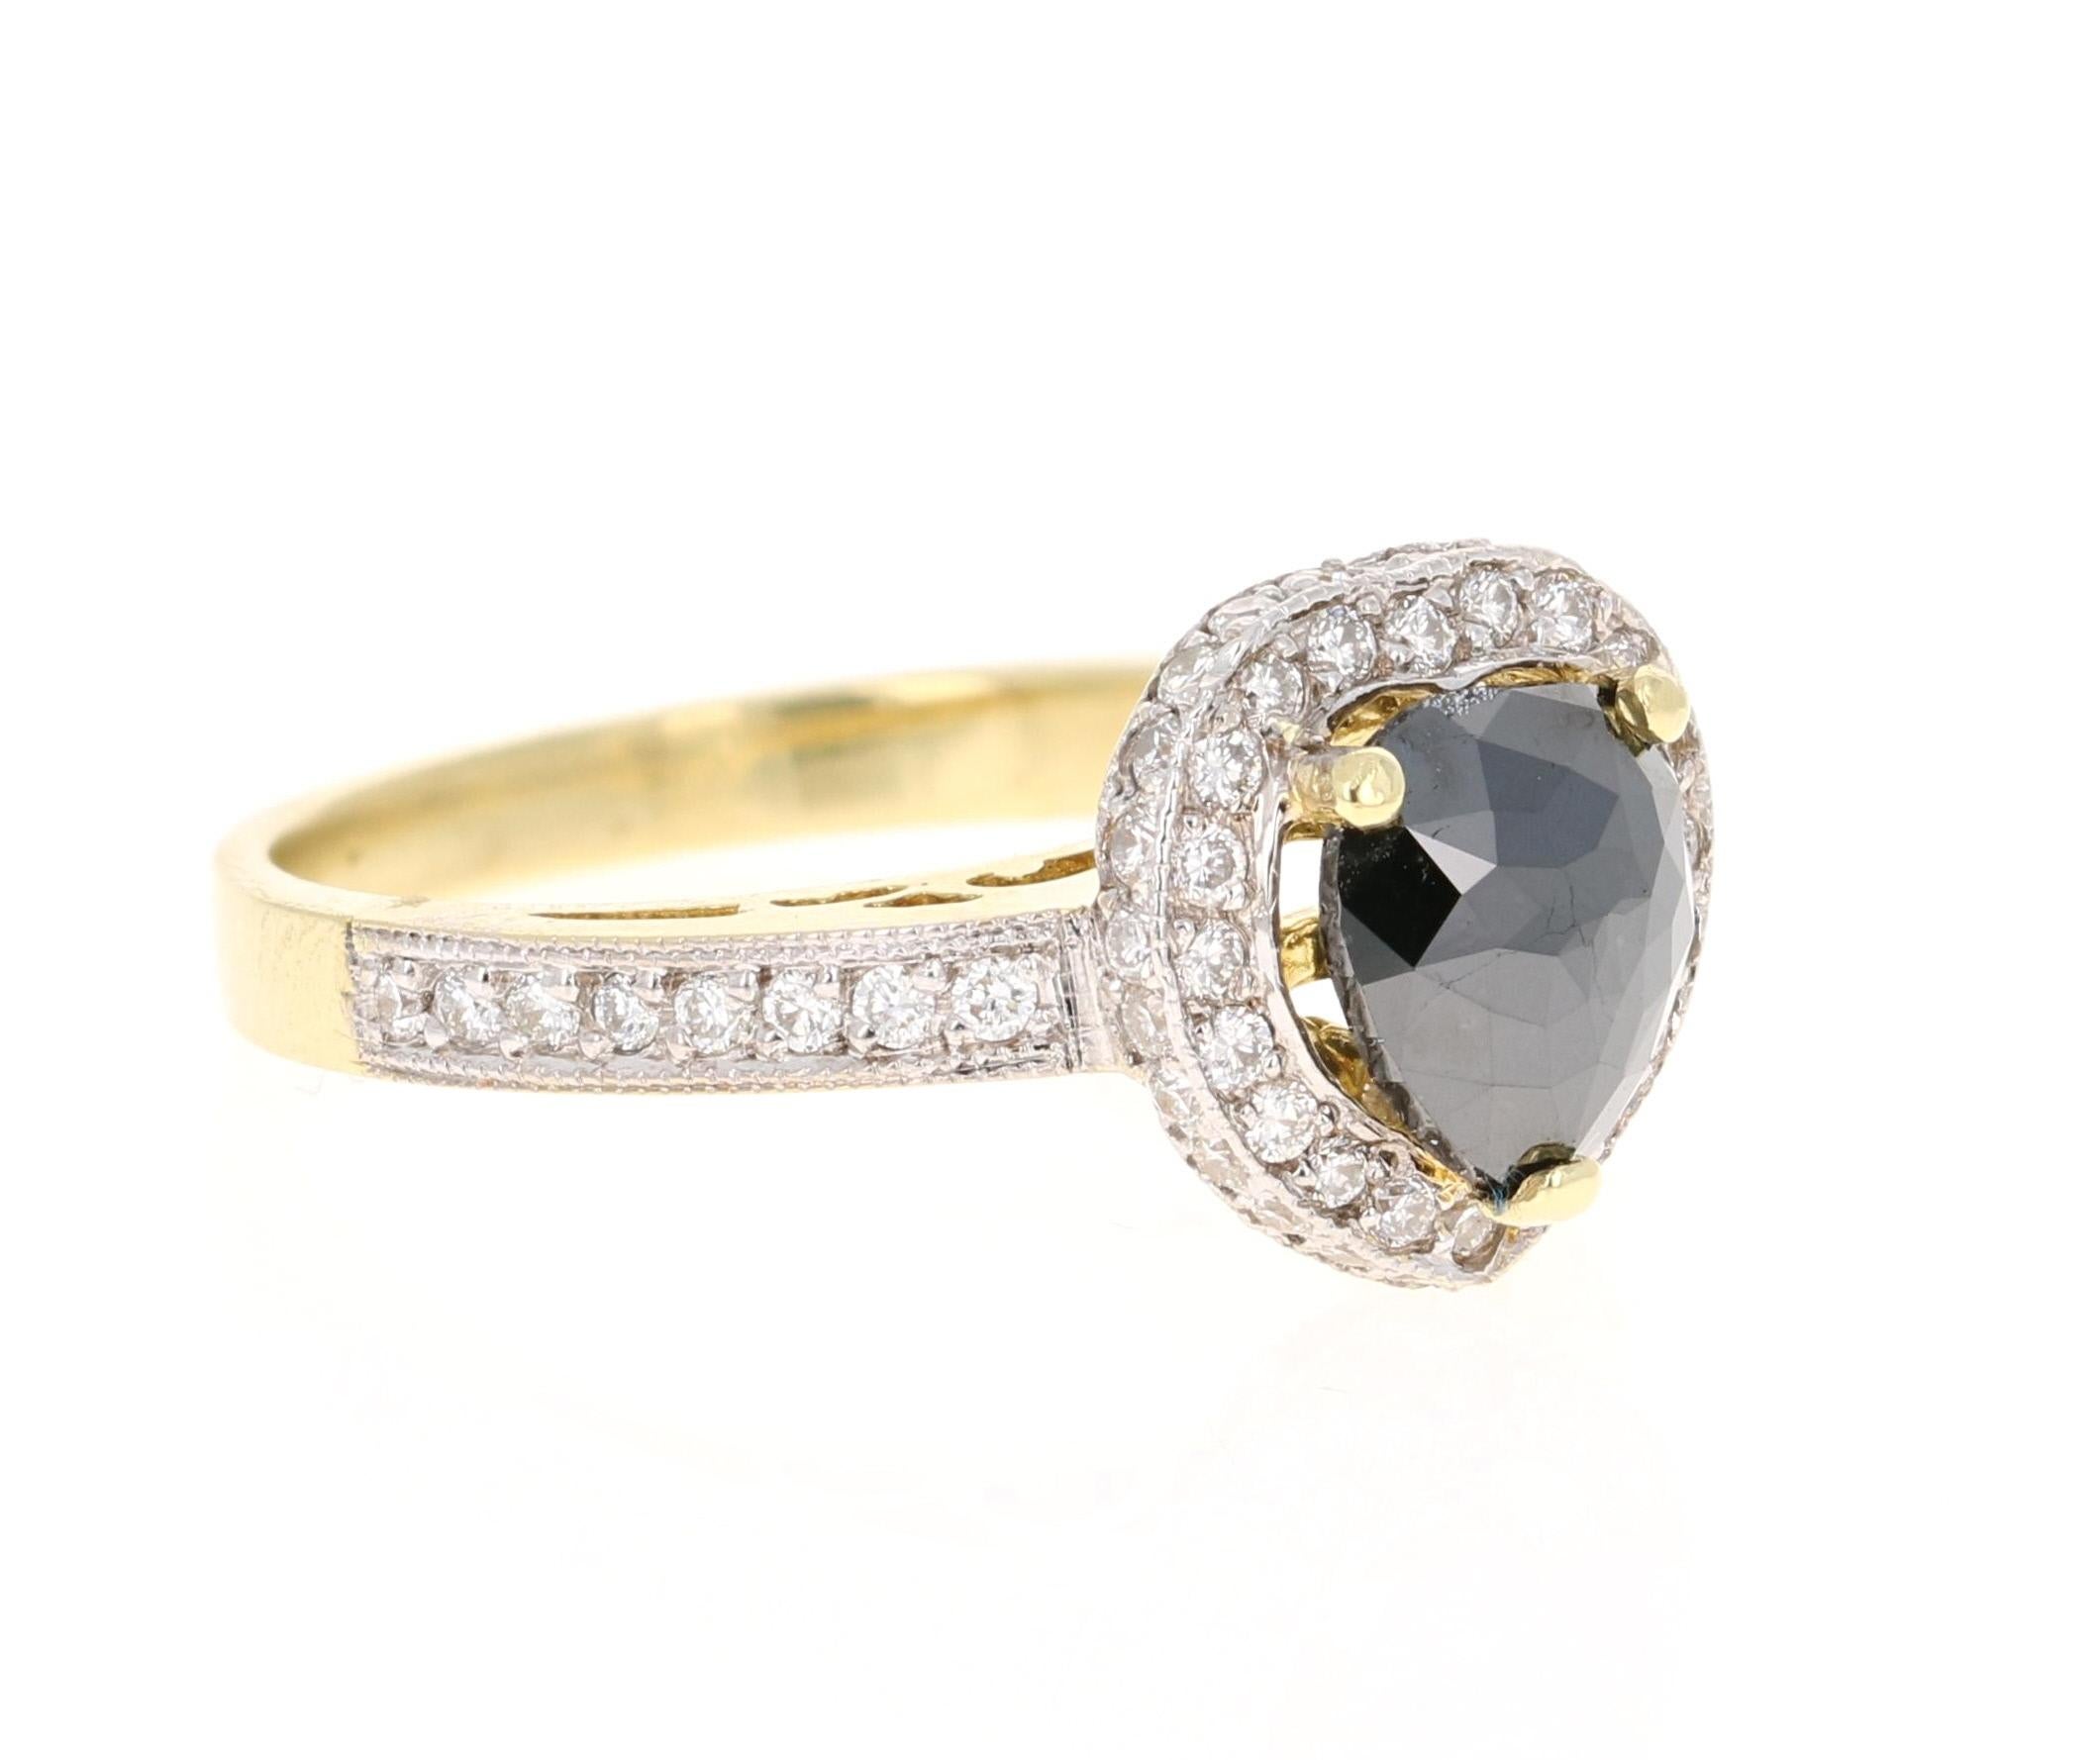 Stunning Black and White Diamond Cocktail or Engagement Ring that is a nothing but a Statement! 

The Pear/Heart Cut Black Diamond is 1.28 Carats and is surrounded by 67 Round Cut Diamonds that weigh 0.57 Carats. The total carat weight of the ring